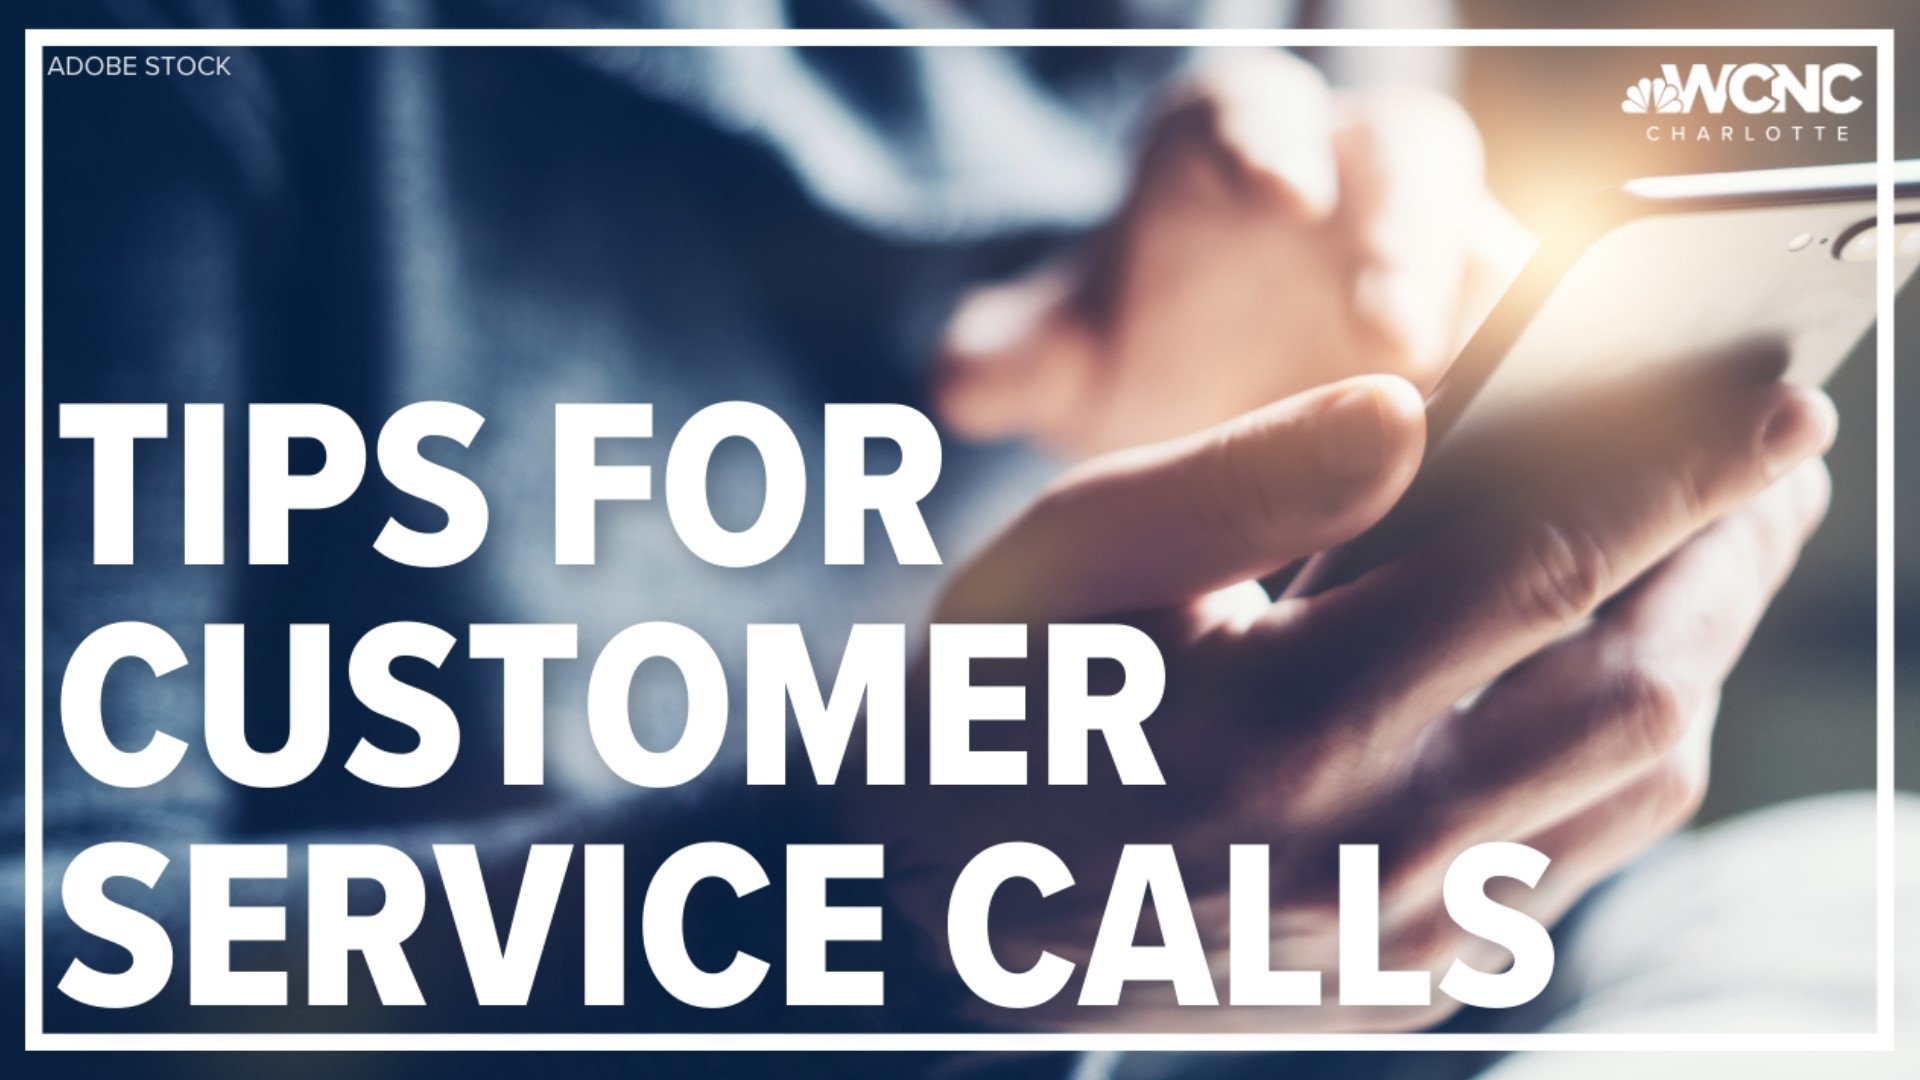 The most effective customer service call comes down to these three things.